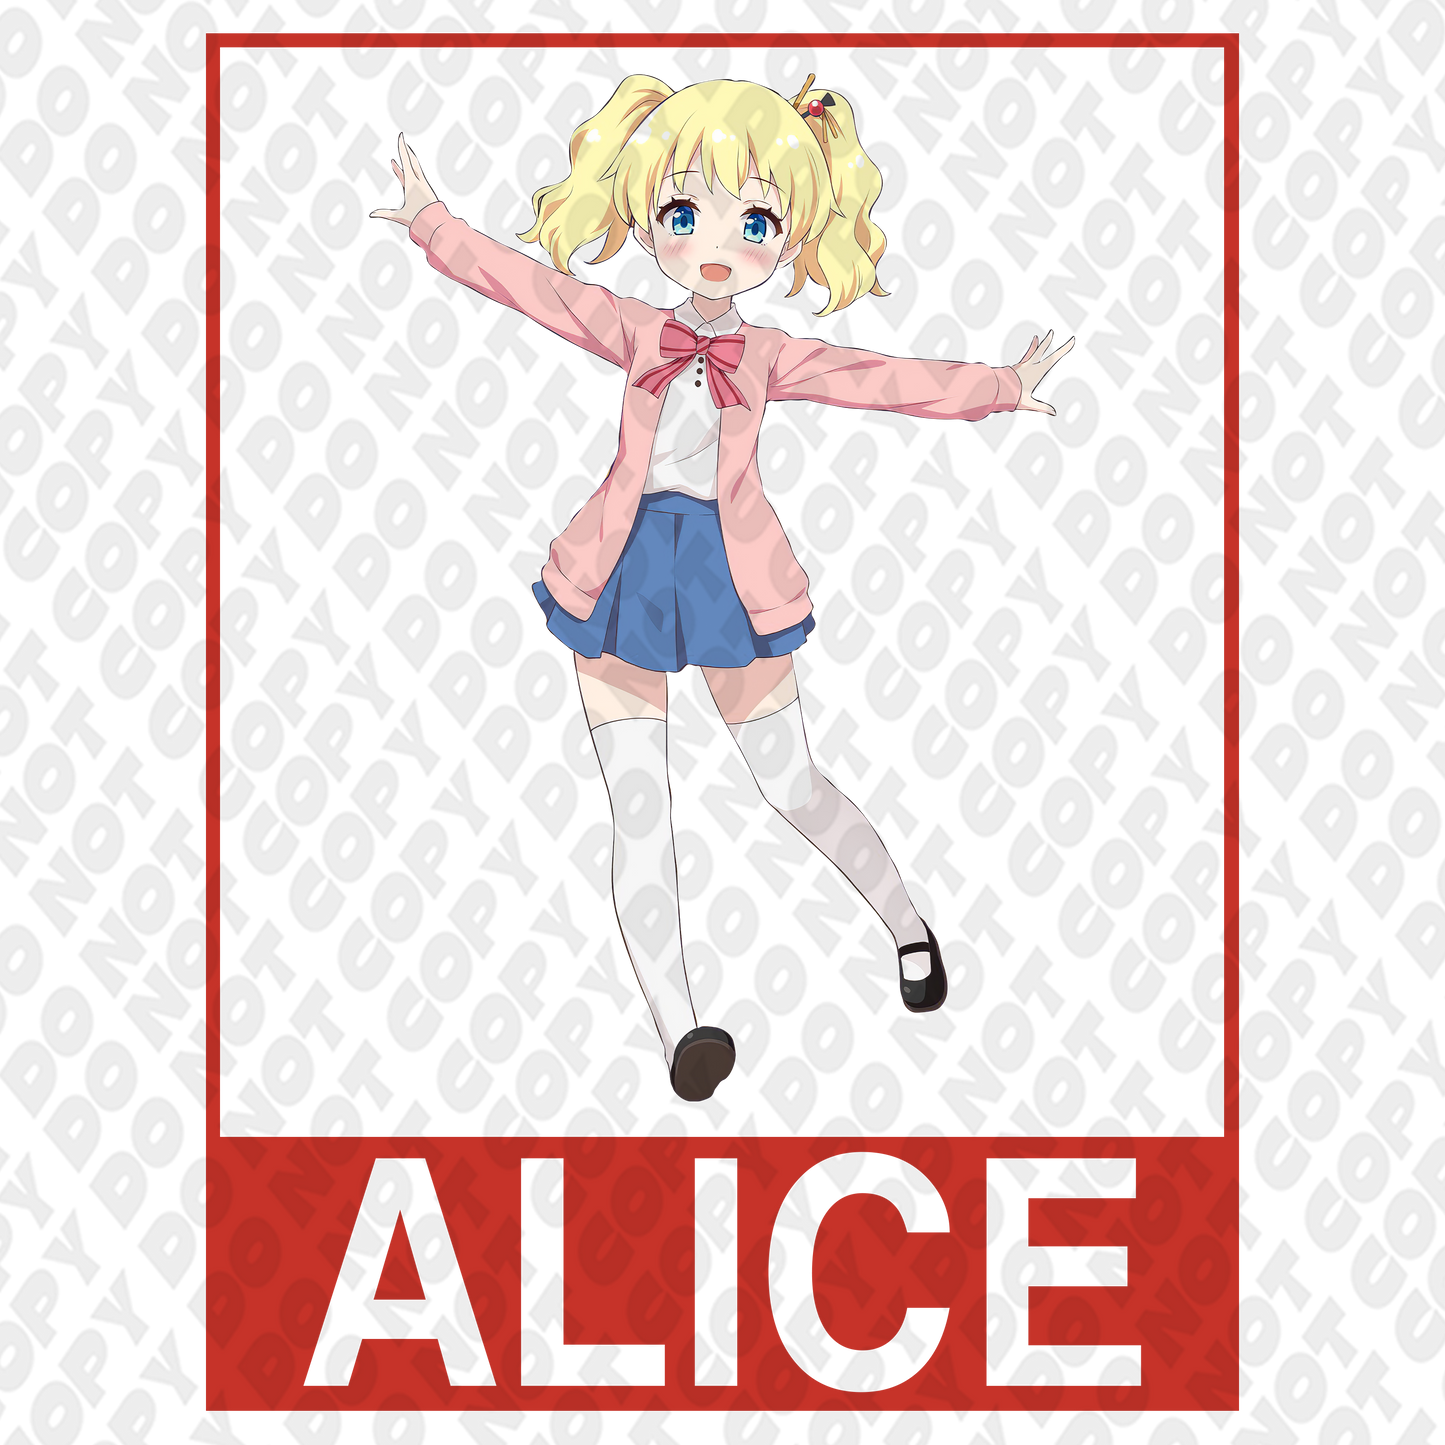 Alice on Air